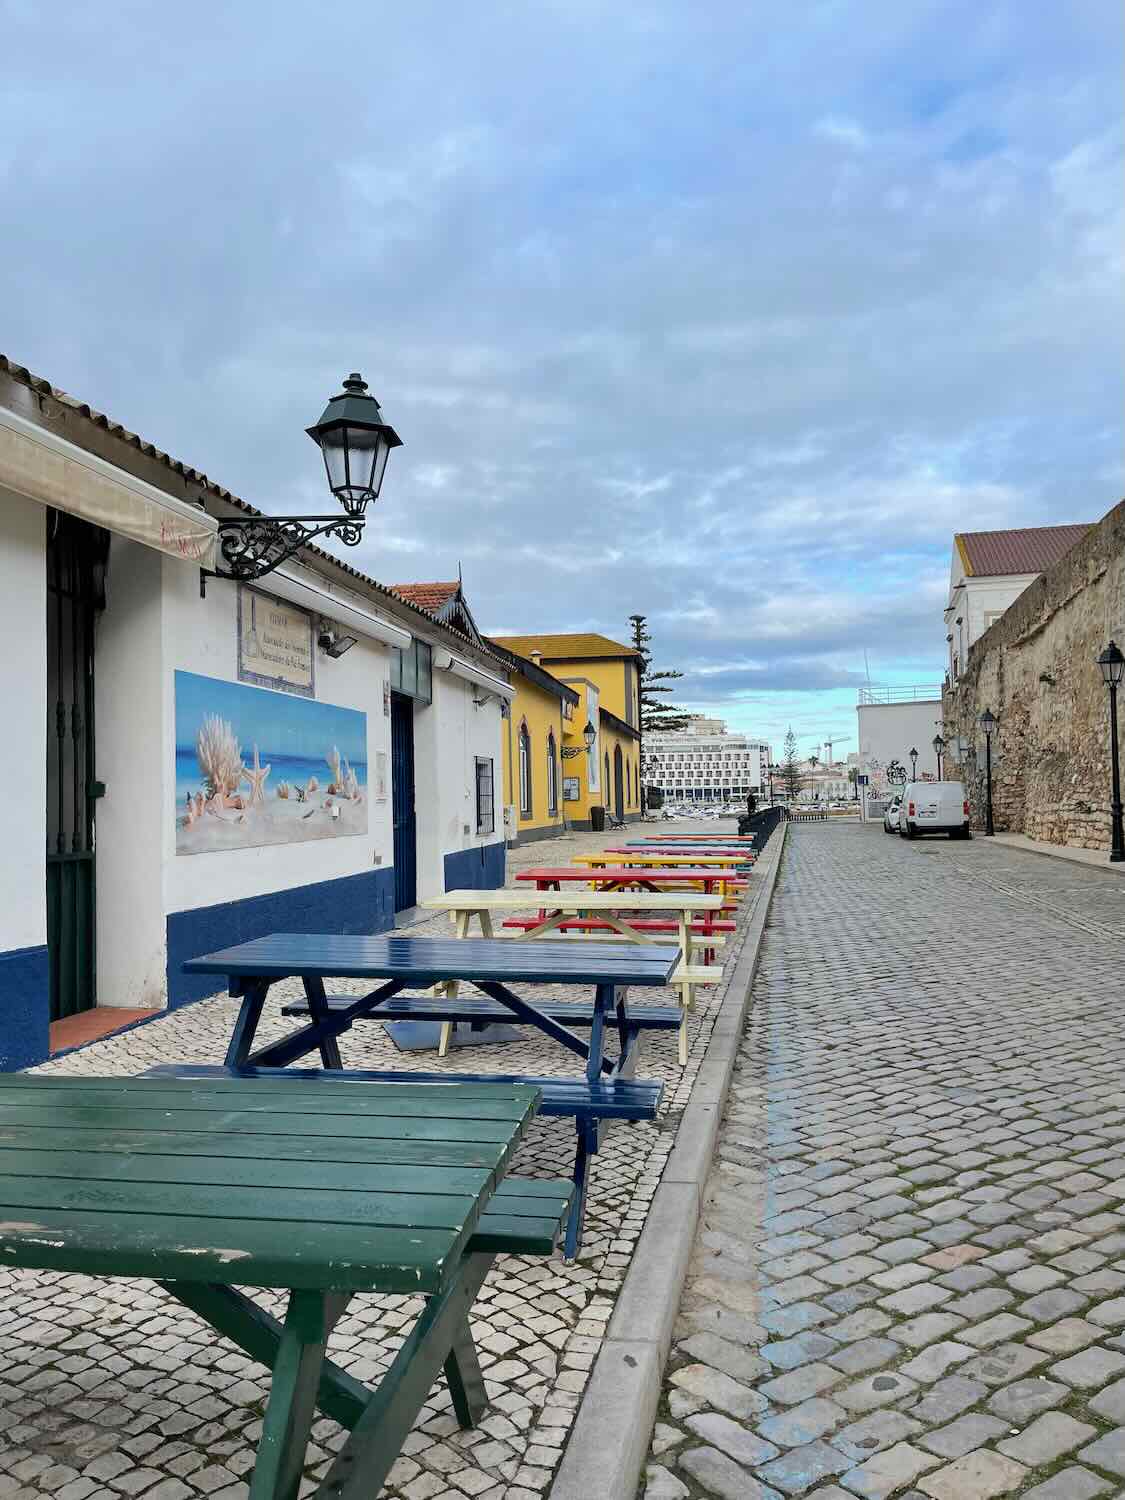 Cobblestone street lined with colorful picnic tables and white buildings with blue accents under a lamp post, in downtown Tavira.